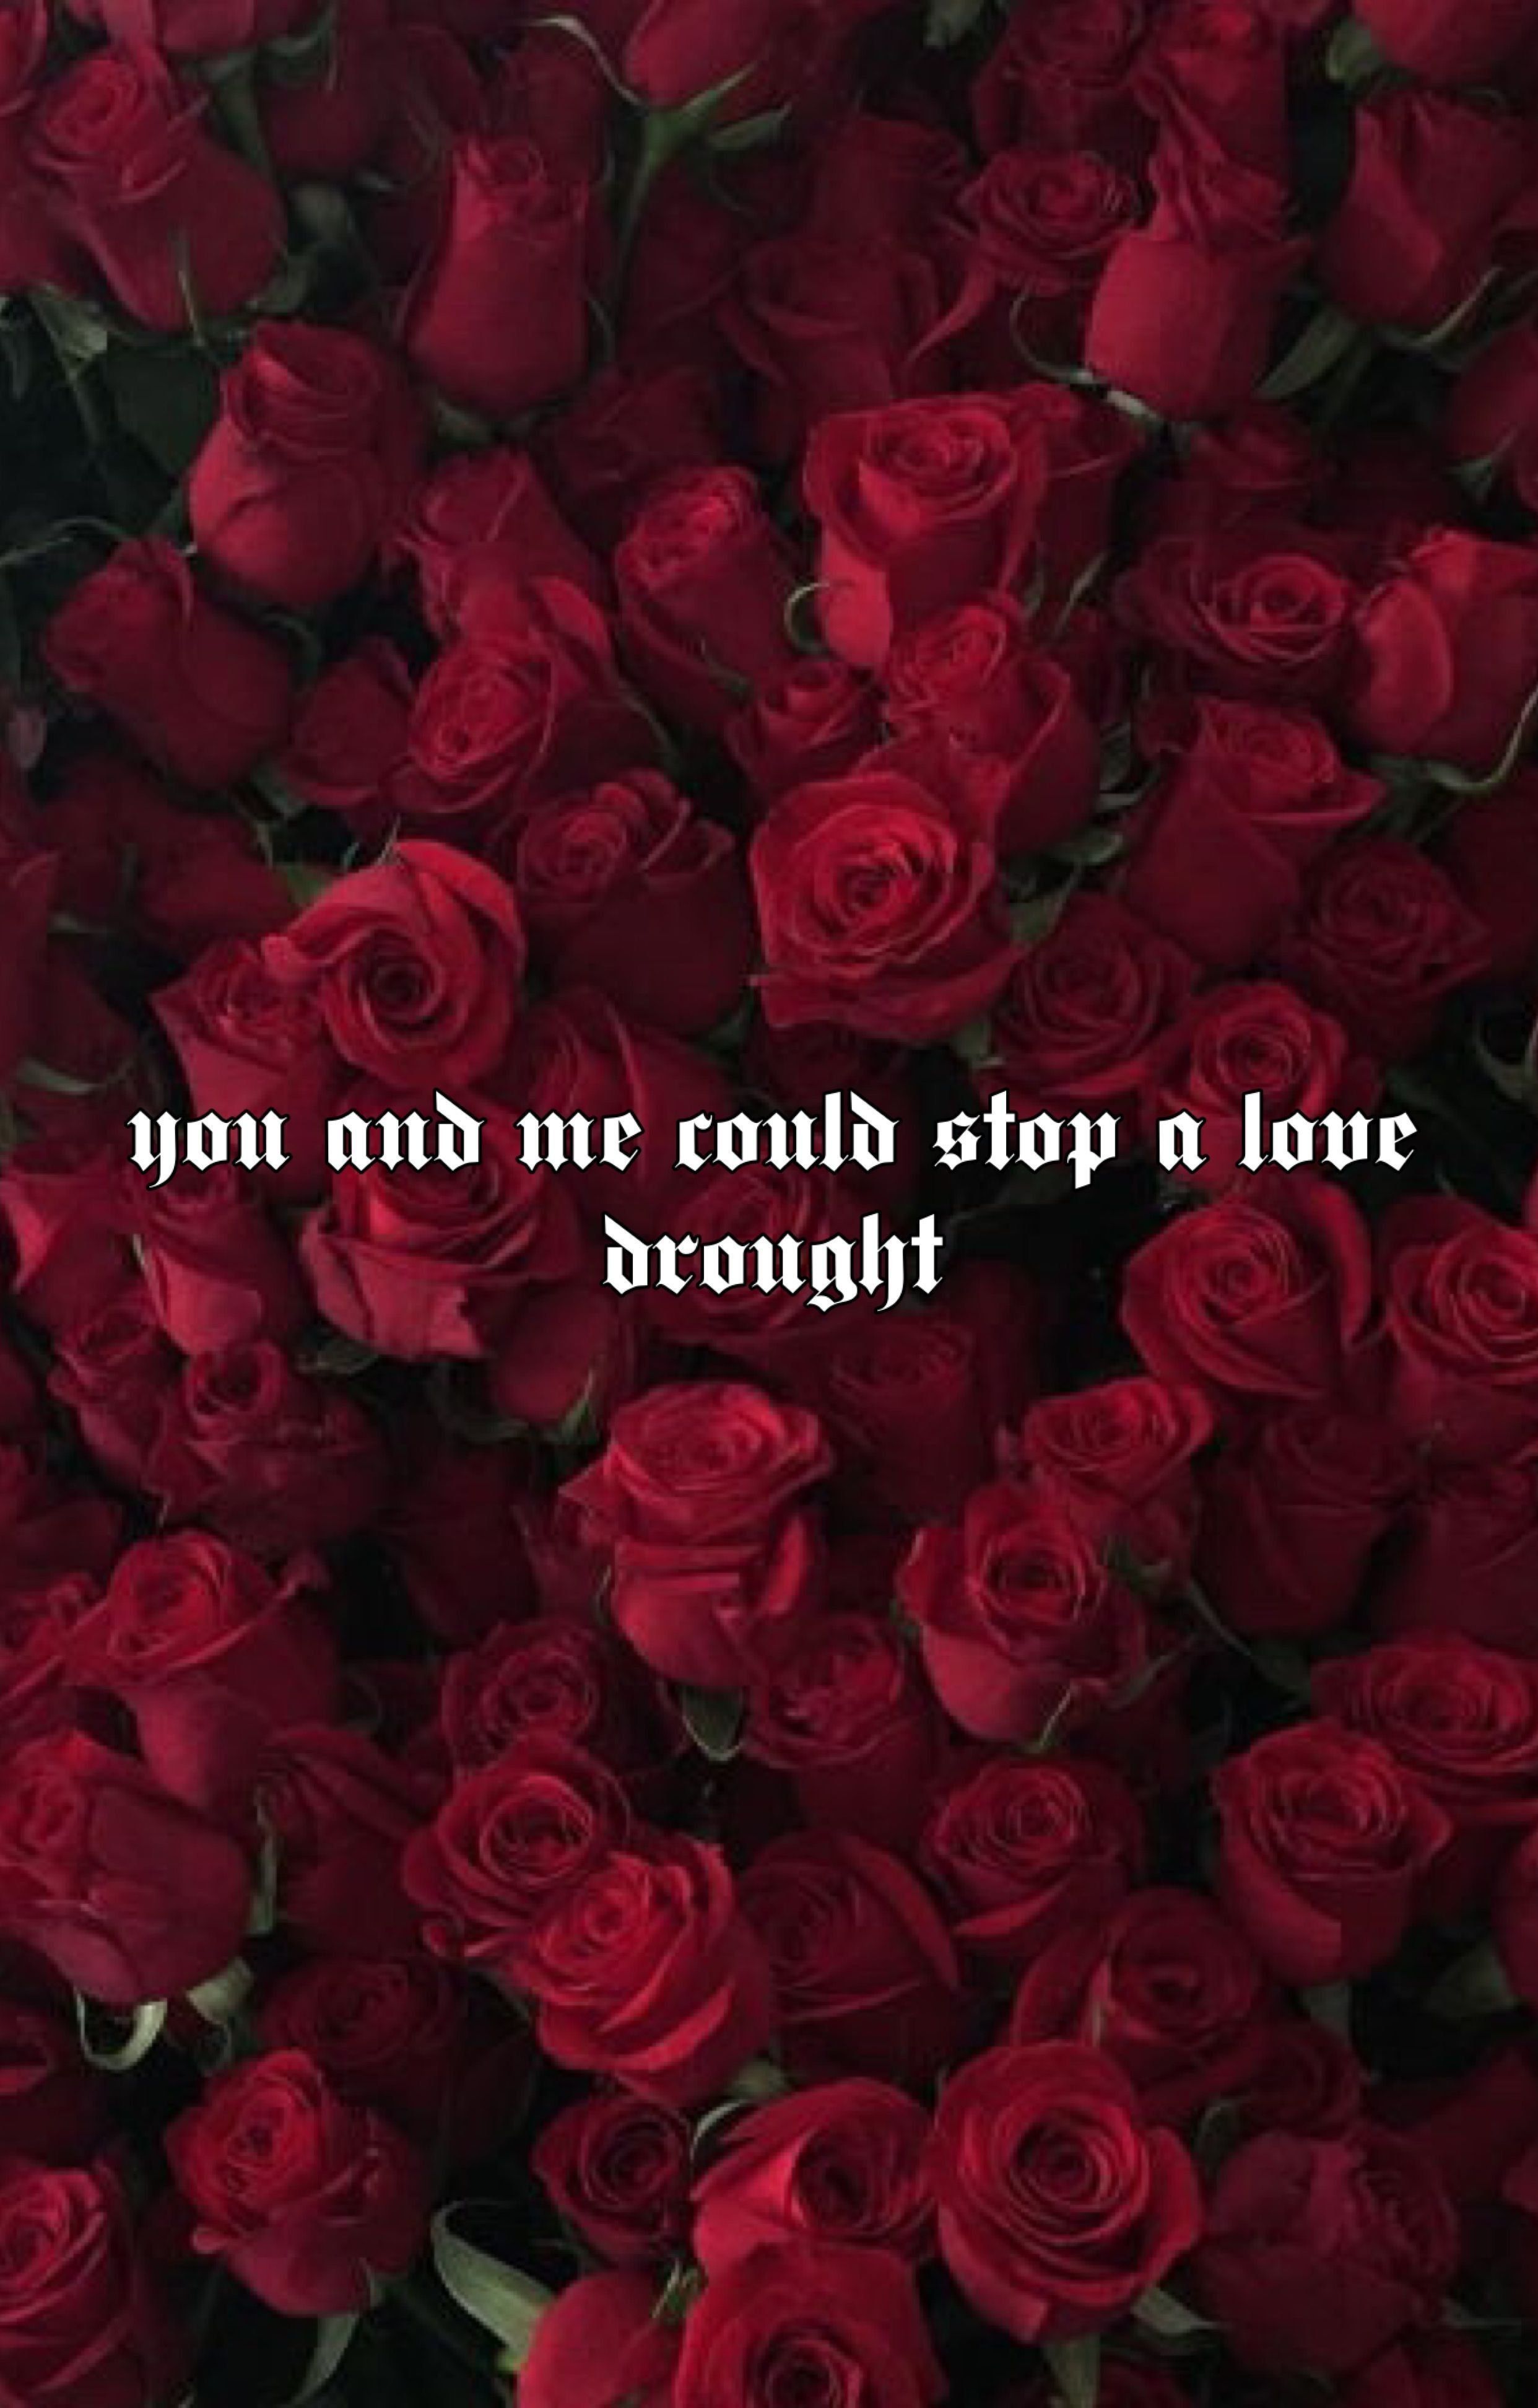 You and me could steal a love strong - Roses, Beyonce